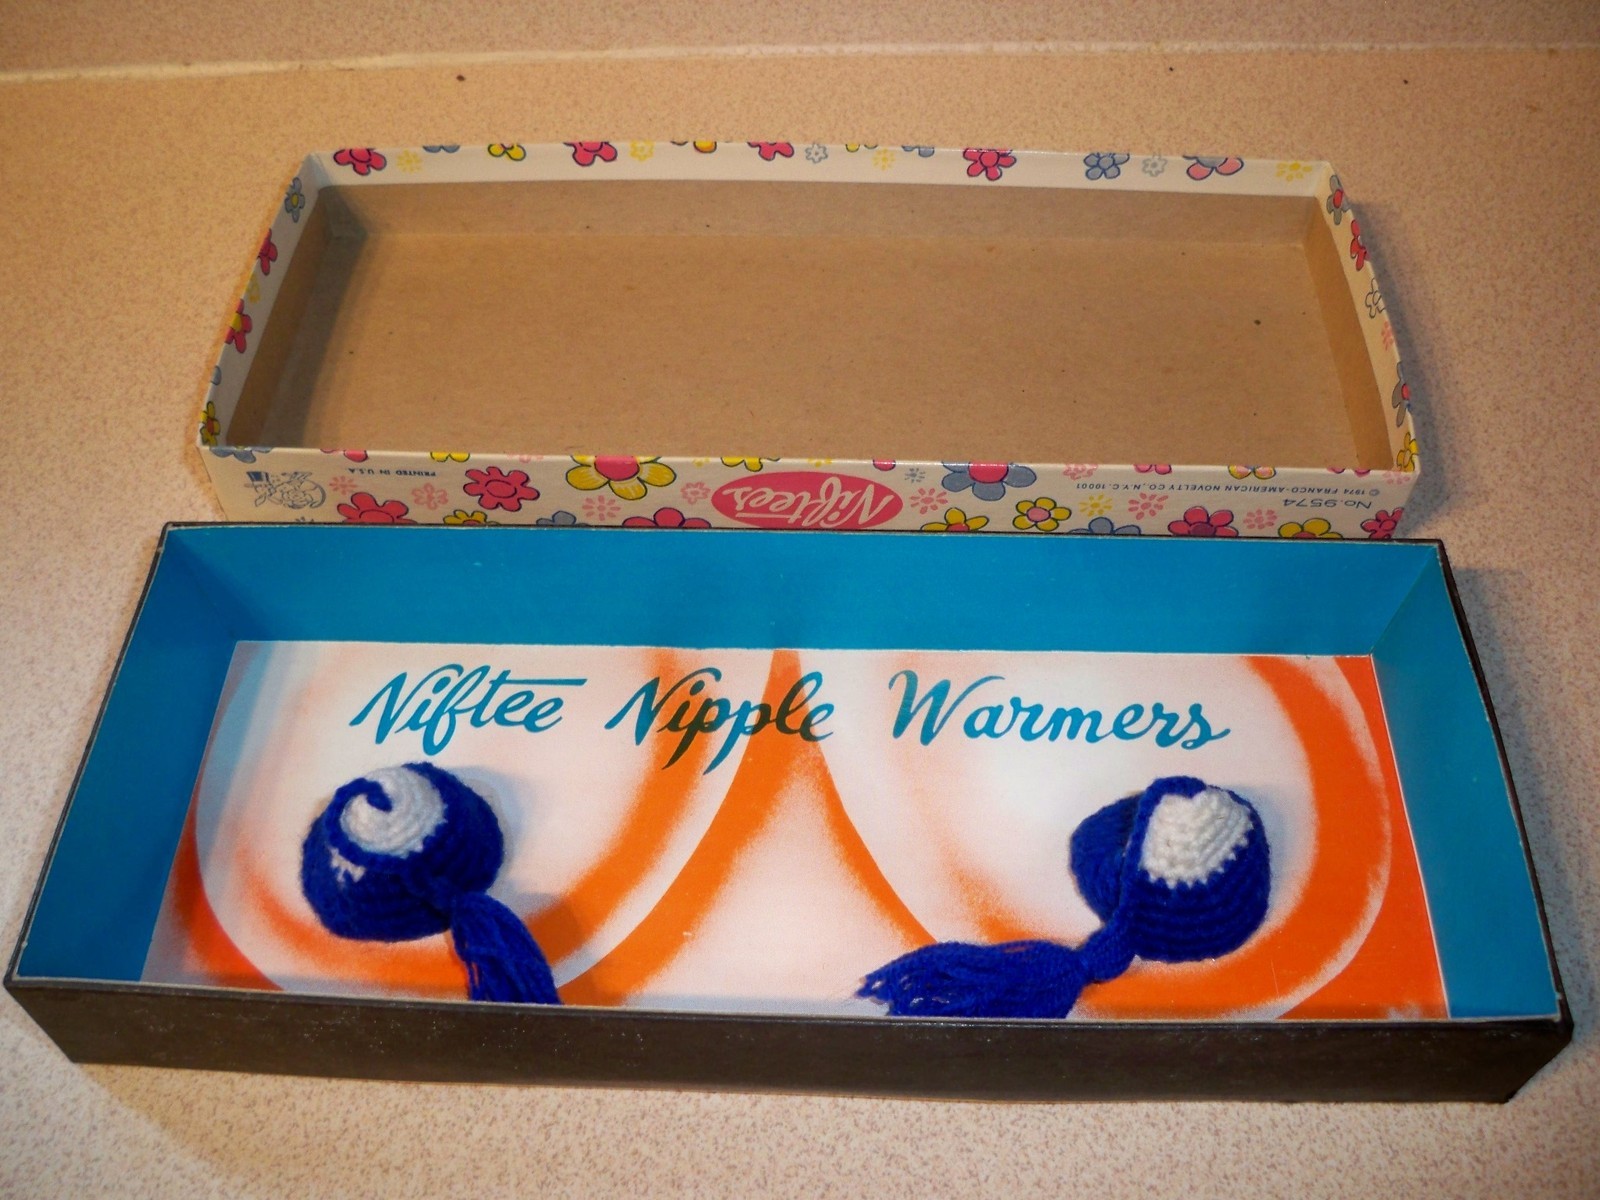 http://www.kitsch-slapped.com/wp-content/uploads/2012/12/Niftees-Nipple-Warmers-For-The-Girl-Who-Has-Everything-in-box.jpg